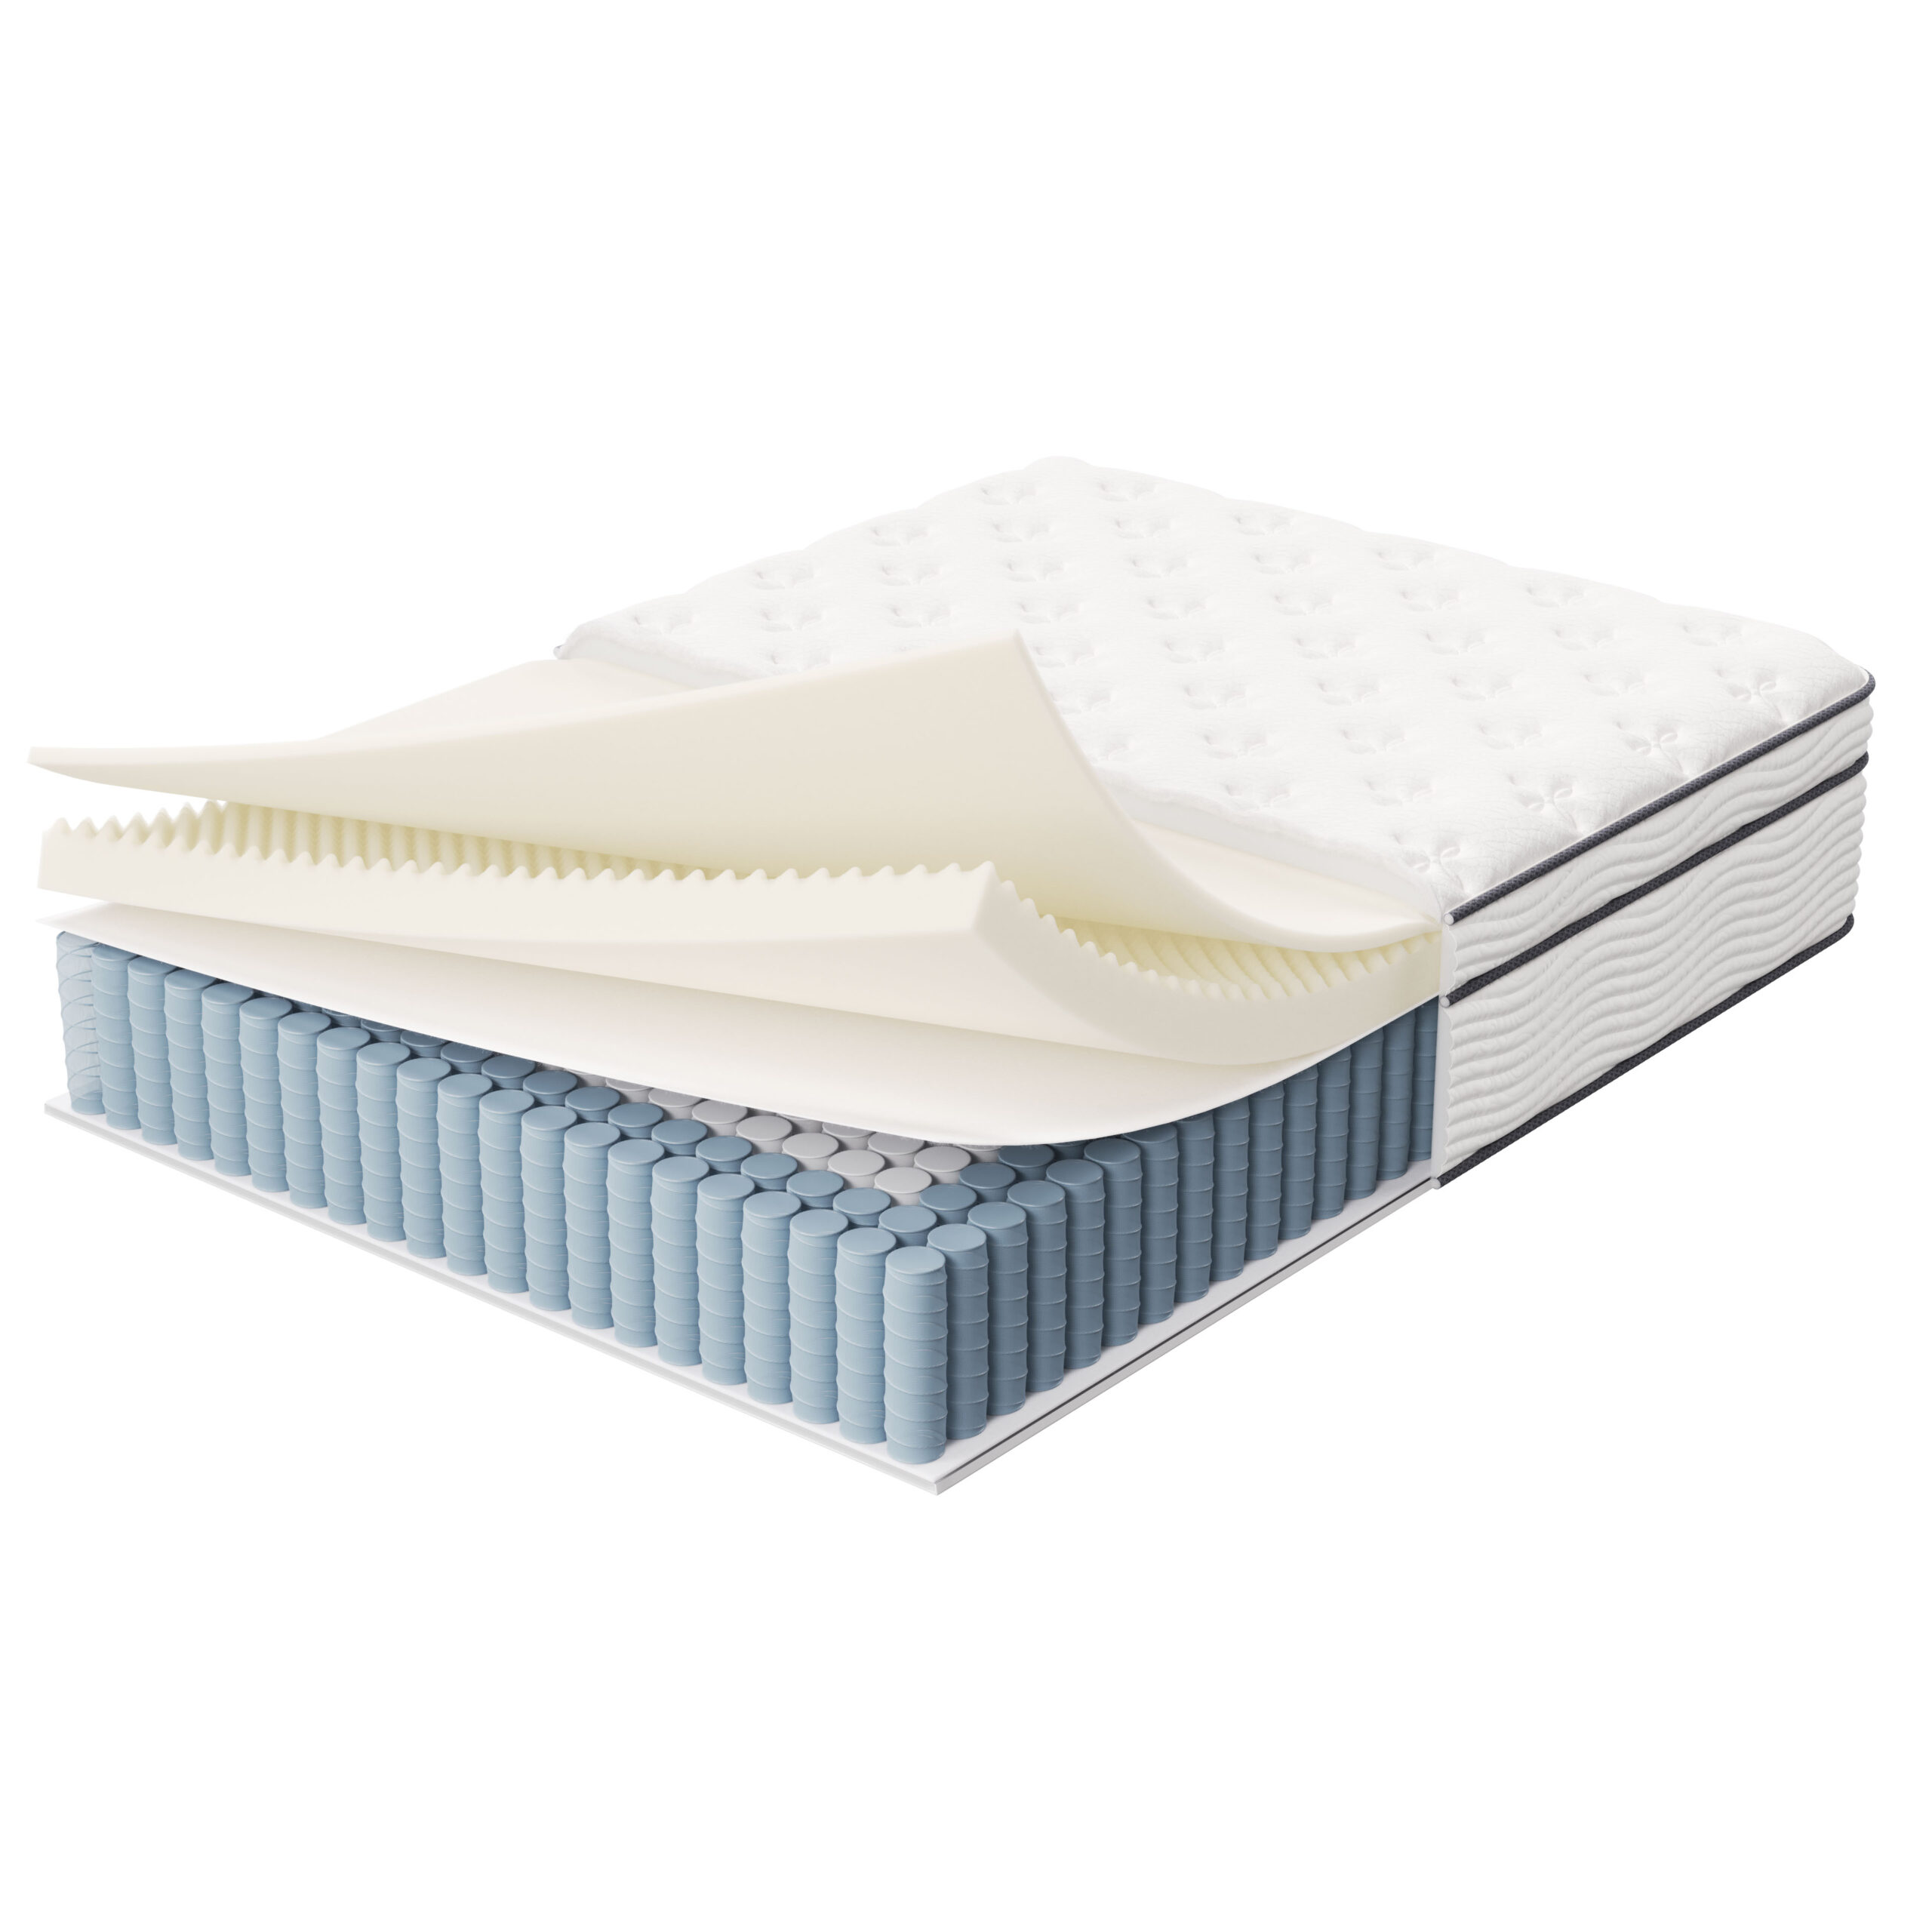 3d visualization cgi product mattress spring inside structure peeling view 3d corner